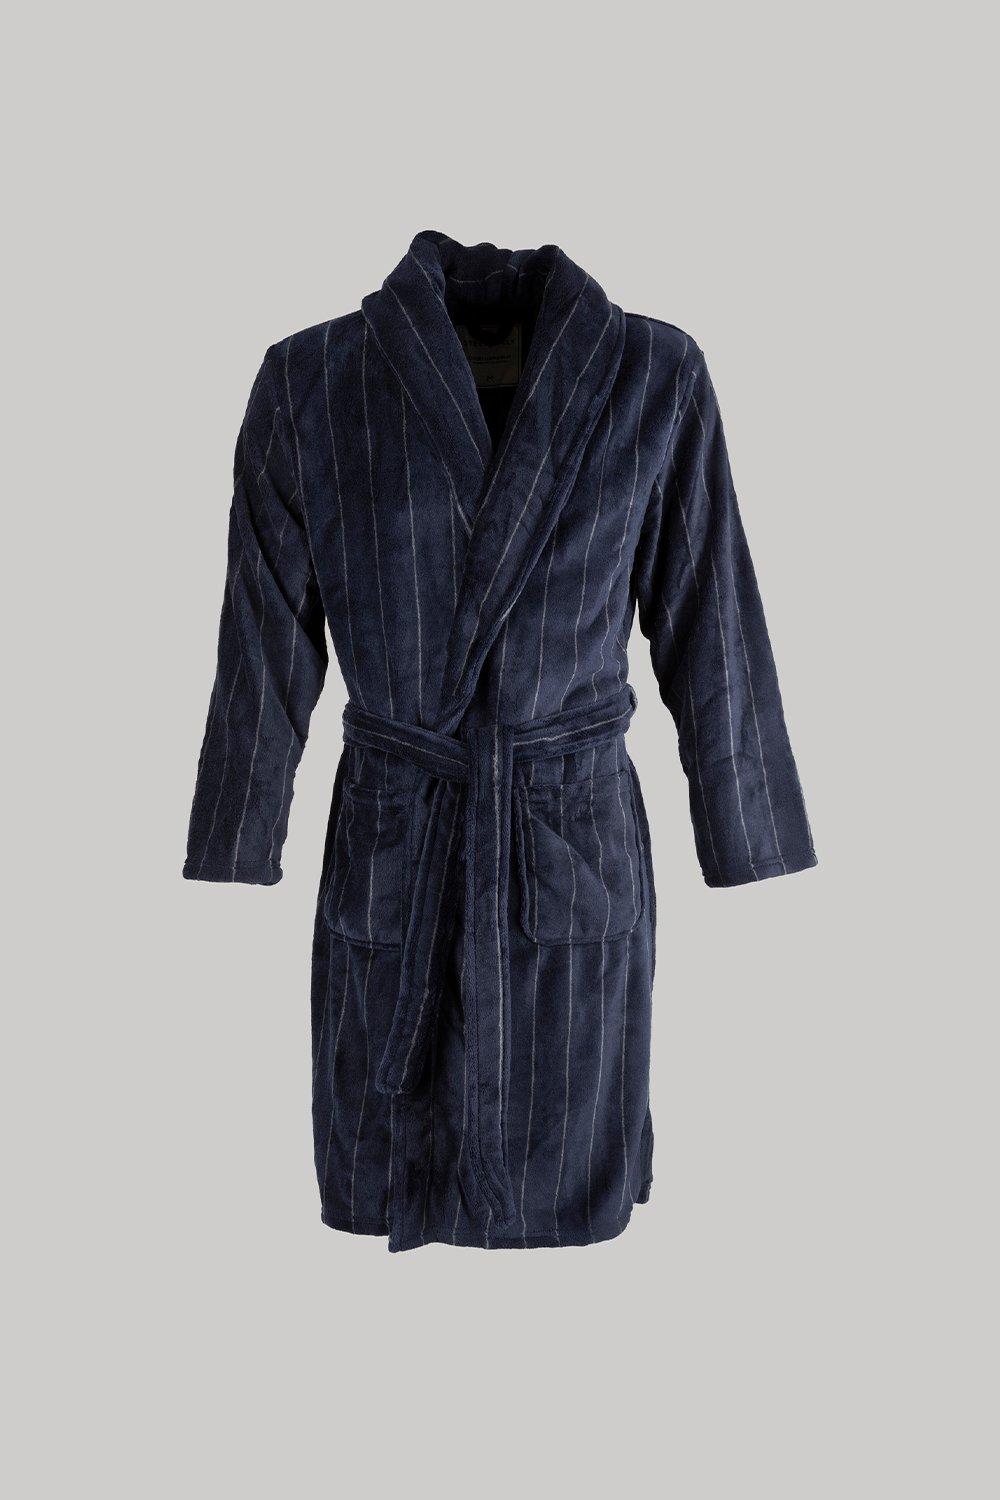 Navy and Grey Stripe Dressing Gown